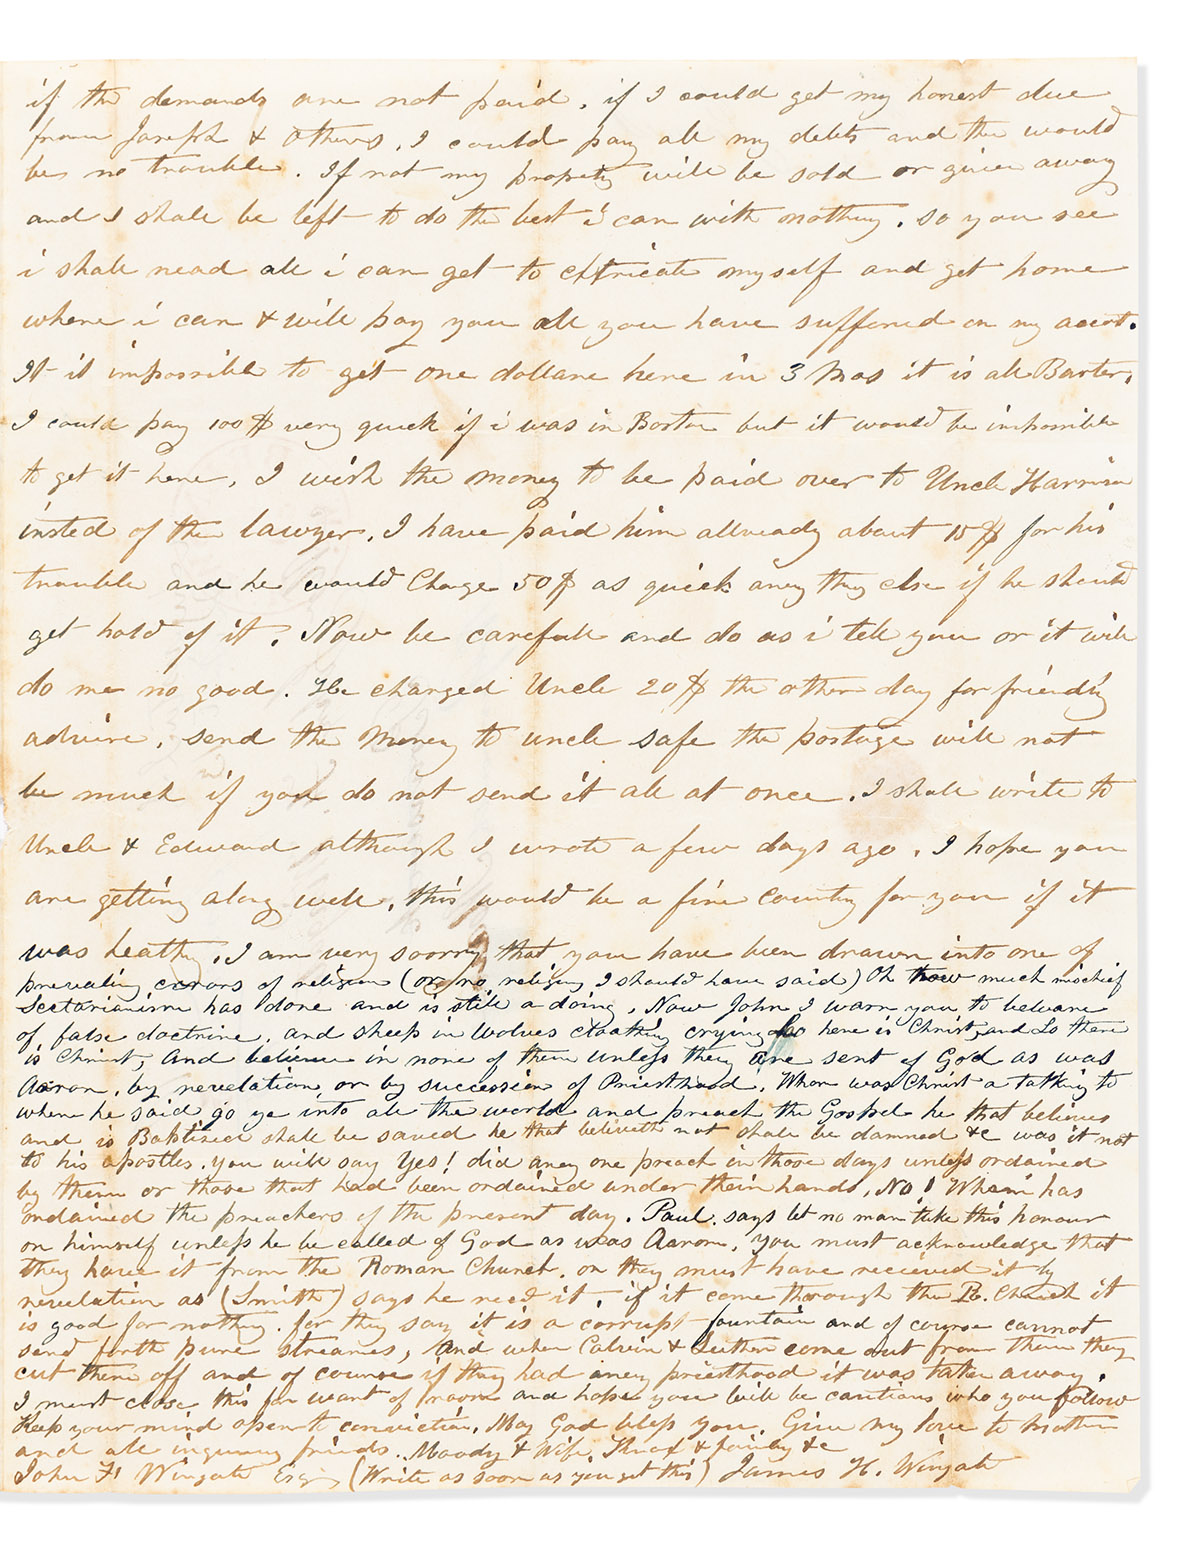 (MORMONS.) Edward B. and James H. Wingate. Letters by two early Boston converts, describing travel to Nauvoo and arguing theology.